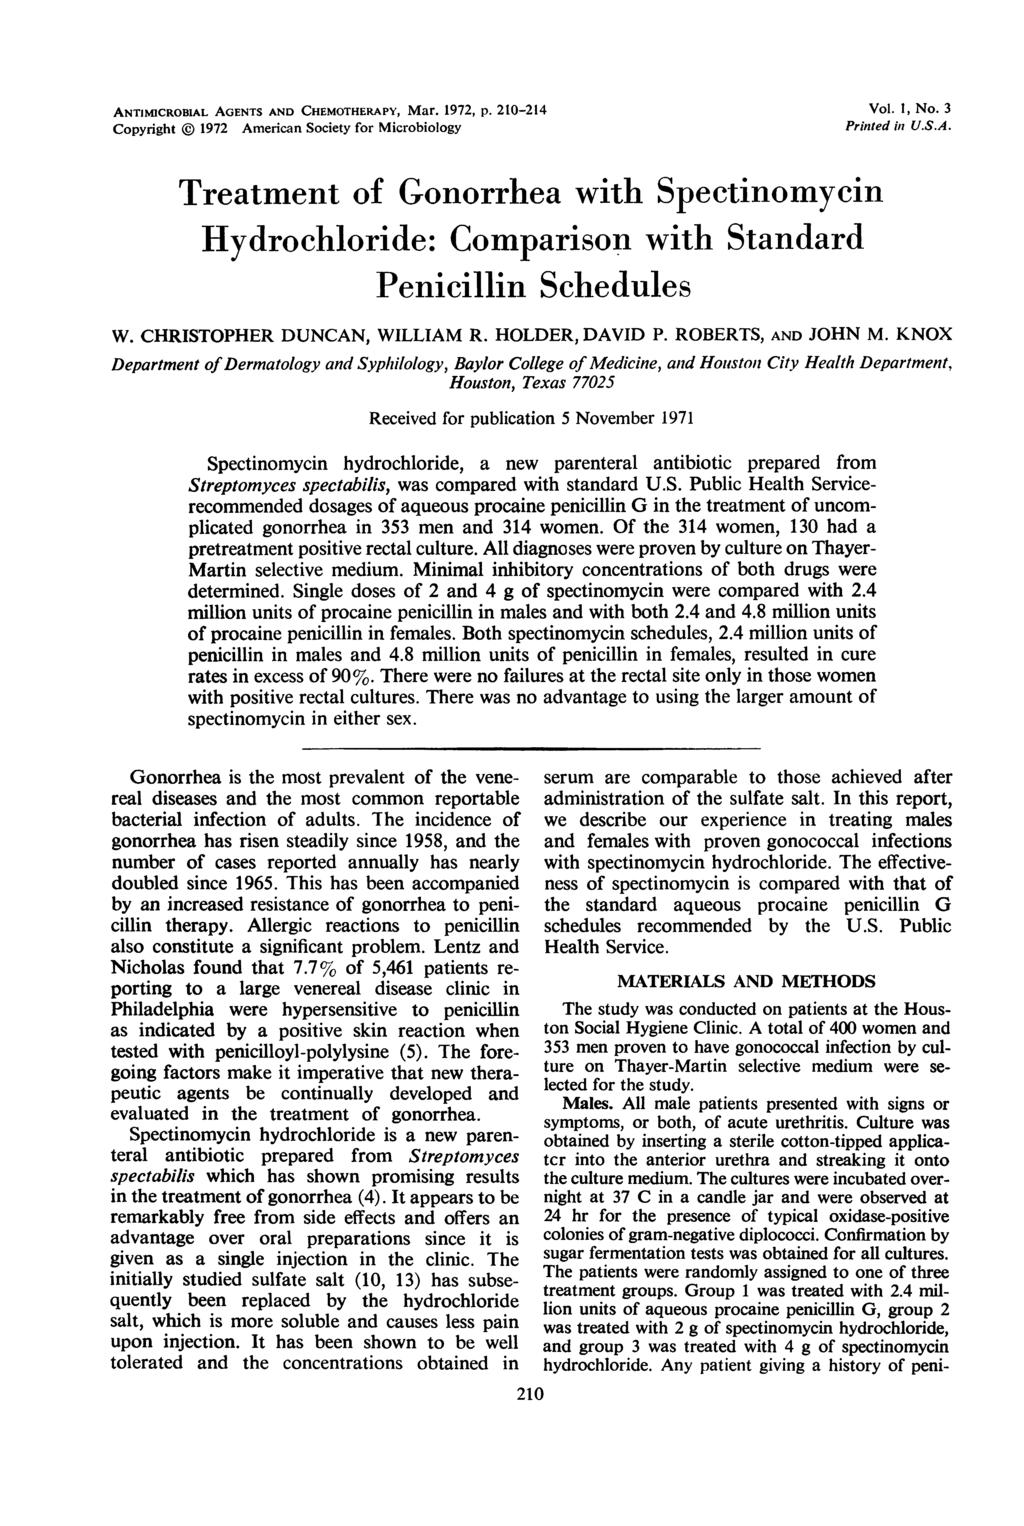 ANTINMCROBIAL AGENTS AND CHEMOTHERAPY, Mar. 1972, p. 210-214 Copyright i 1972 American Society for Microbiology Vol. 1, No. 3 Printed in U.S.A. Treatment of Gonorrhea with Spectinomycin Hydrochloride: Comparison with Standard Penicillin Schedules W.